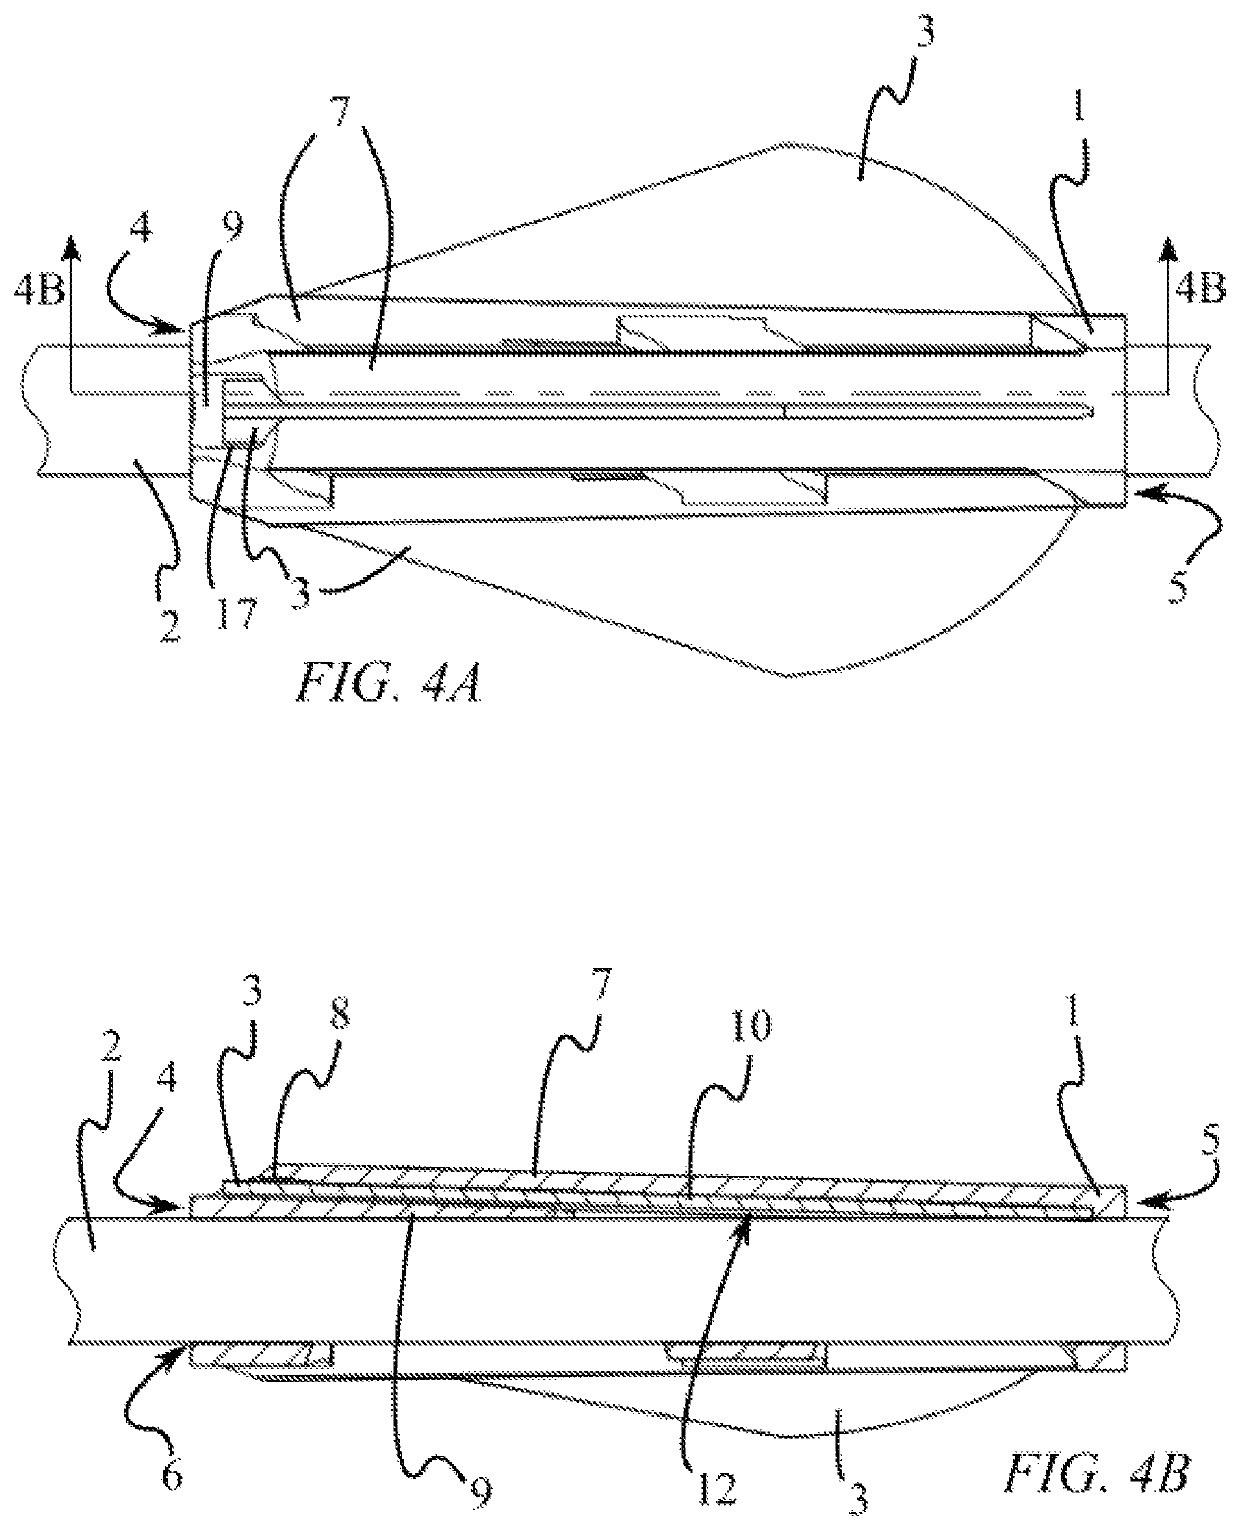 Arrow fletching apparatus with tapered body